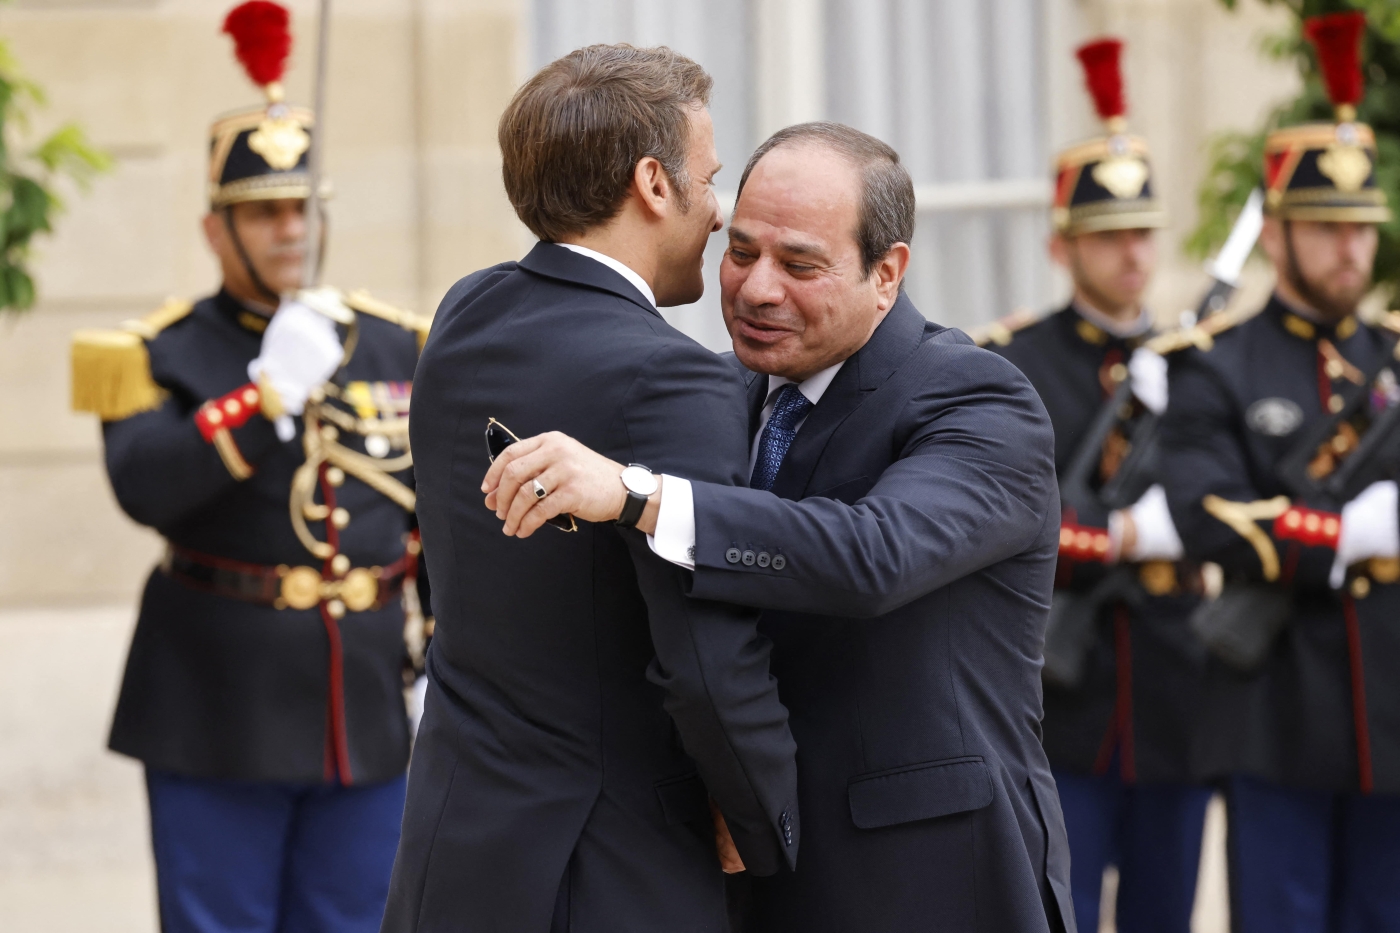 France's President Macron hugs Egypt's President Abdel Fattah el-Sisi (R) upon his arrival at the Elysee Palace in Paris on July 22, 2022 (AFP)